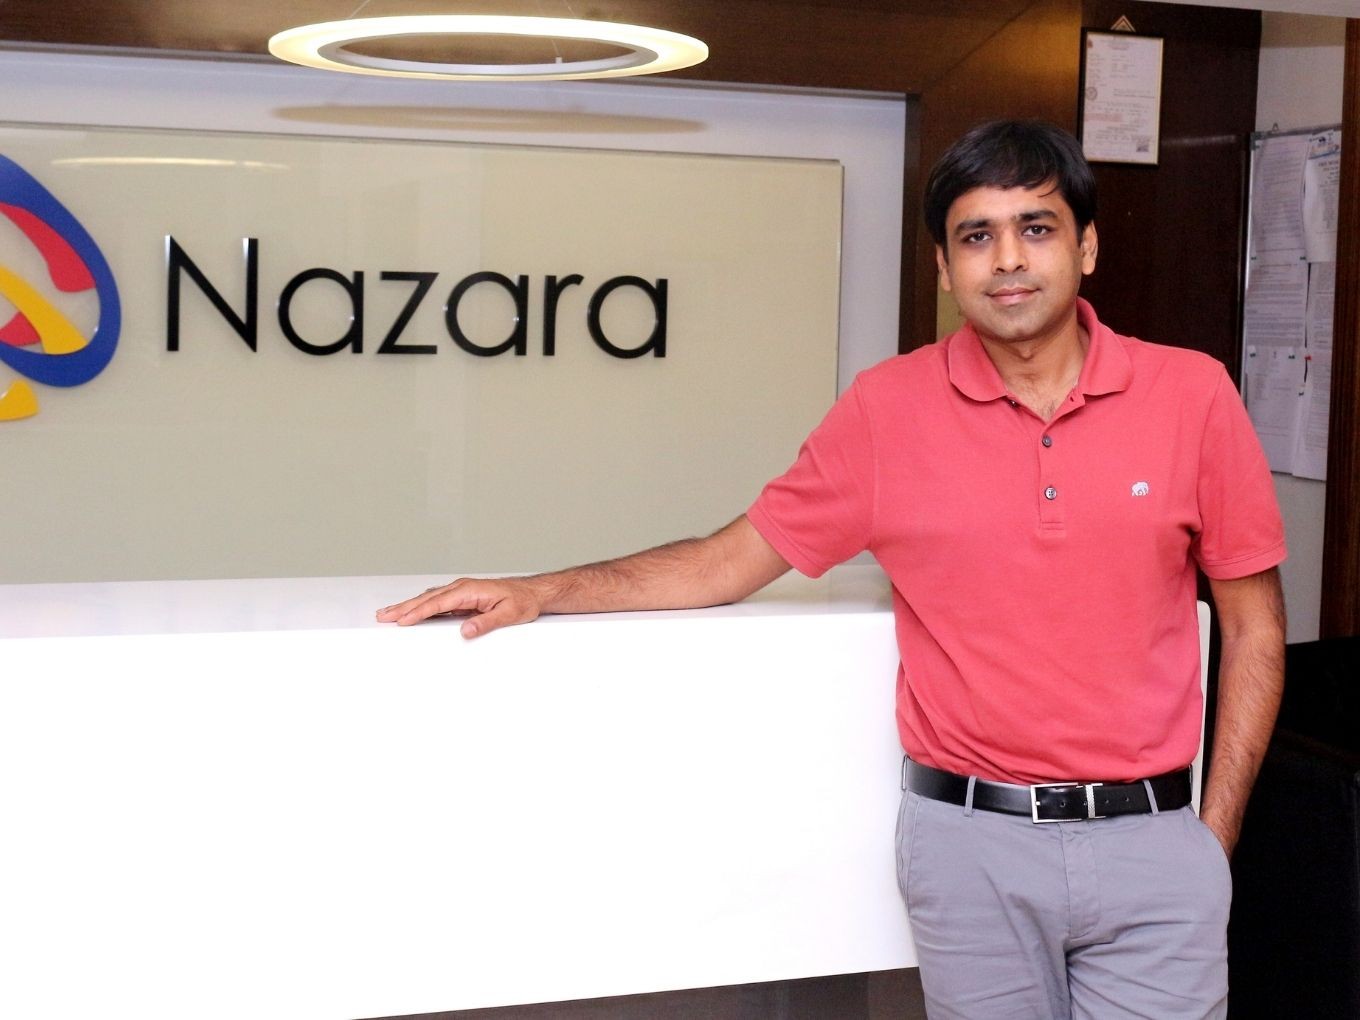 How Nazara Never Lost Focus On Profit And Value Creation For Investors